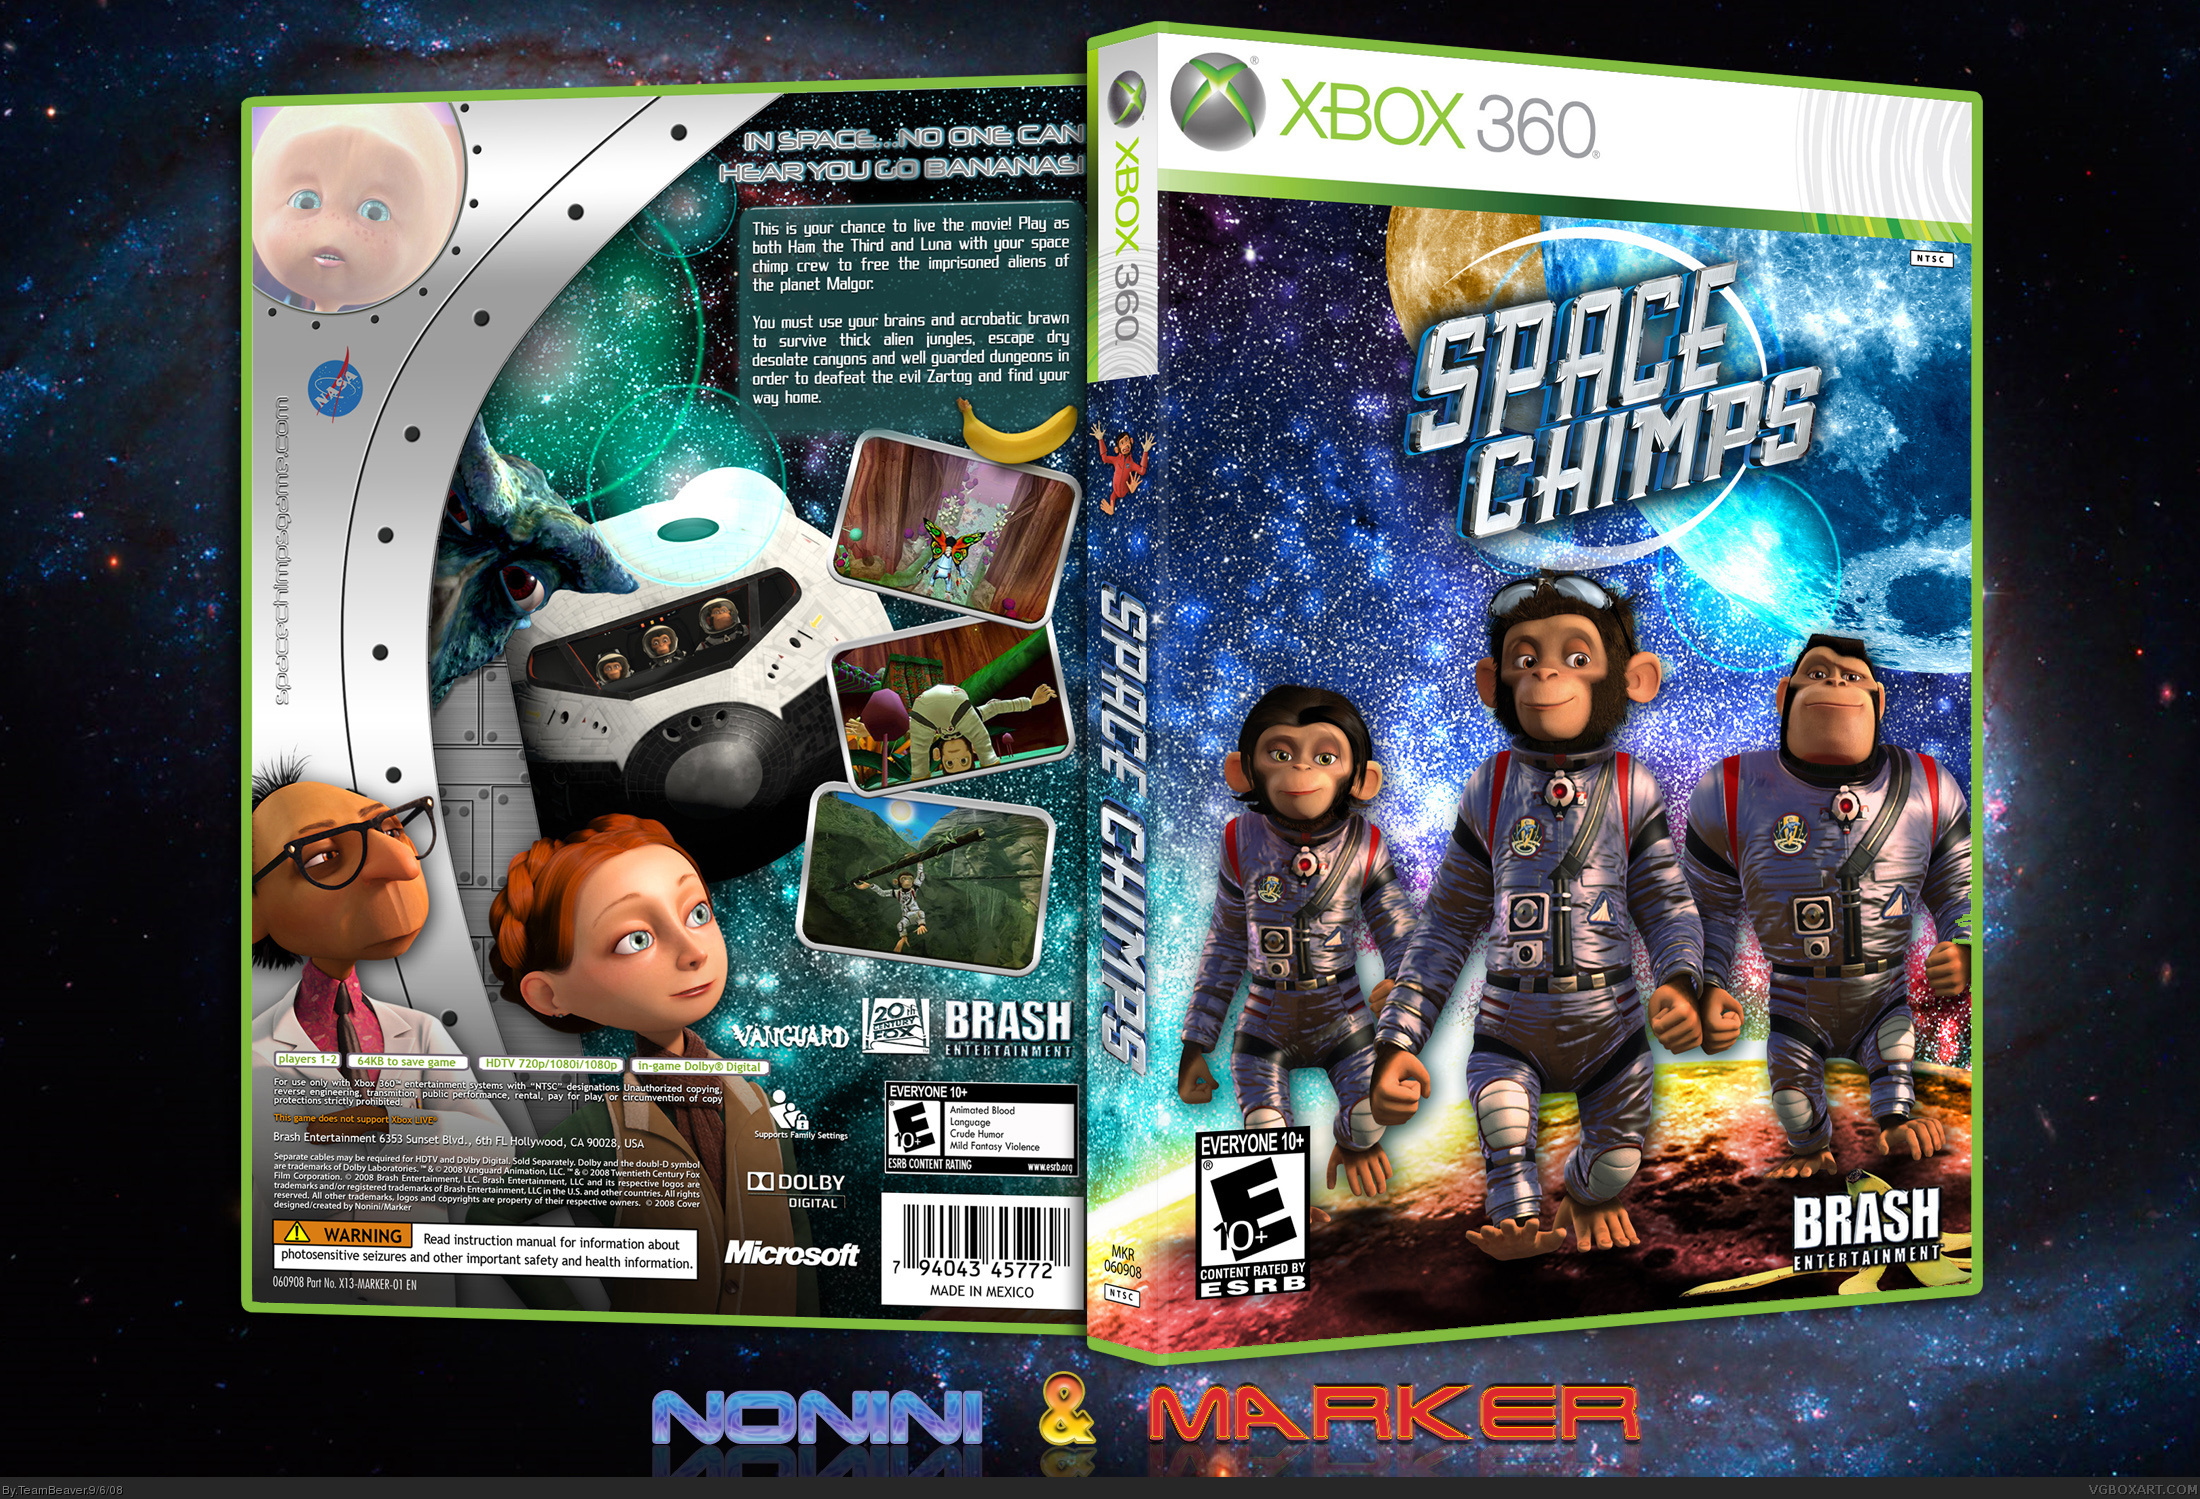 Space Chimps box cover